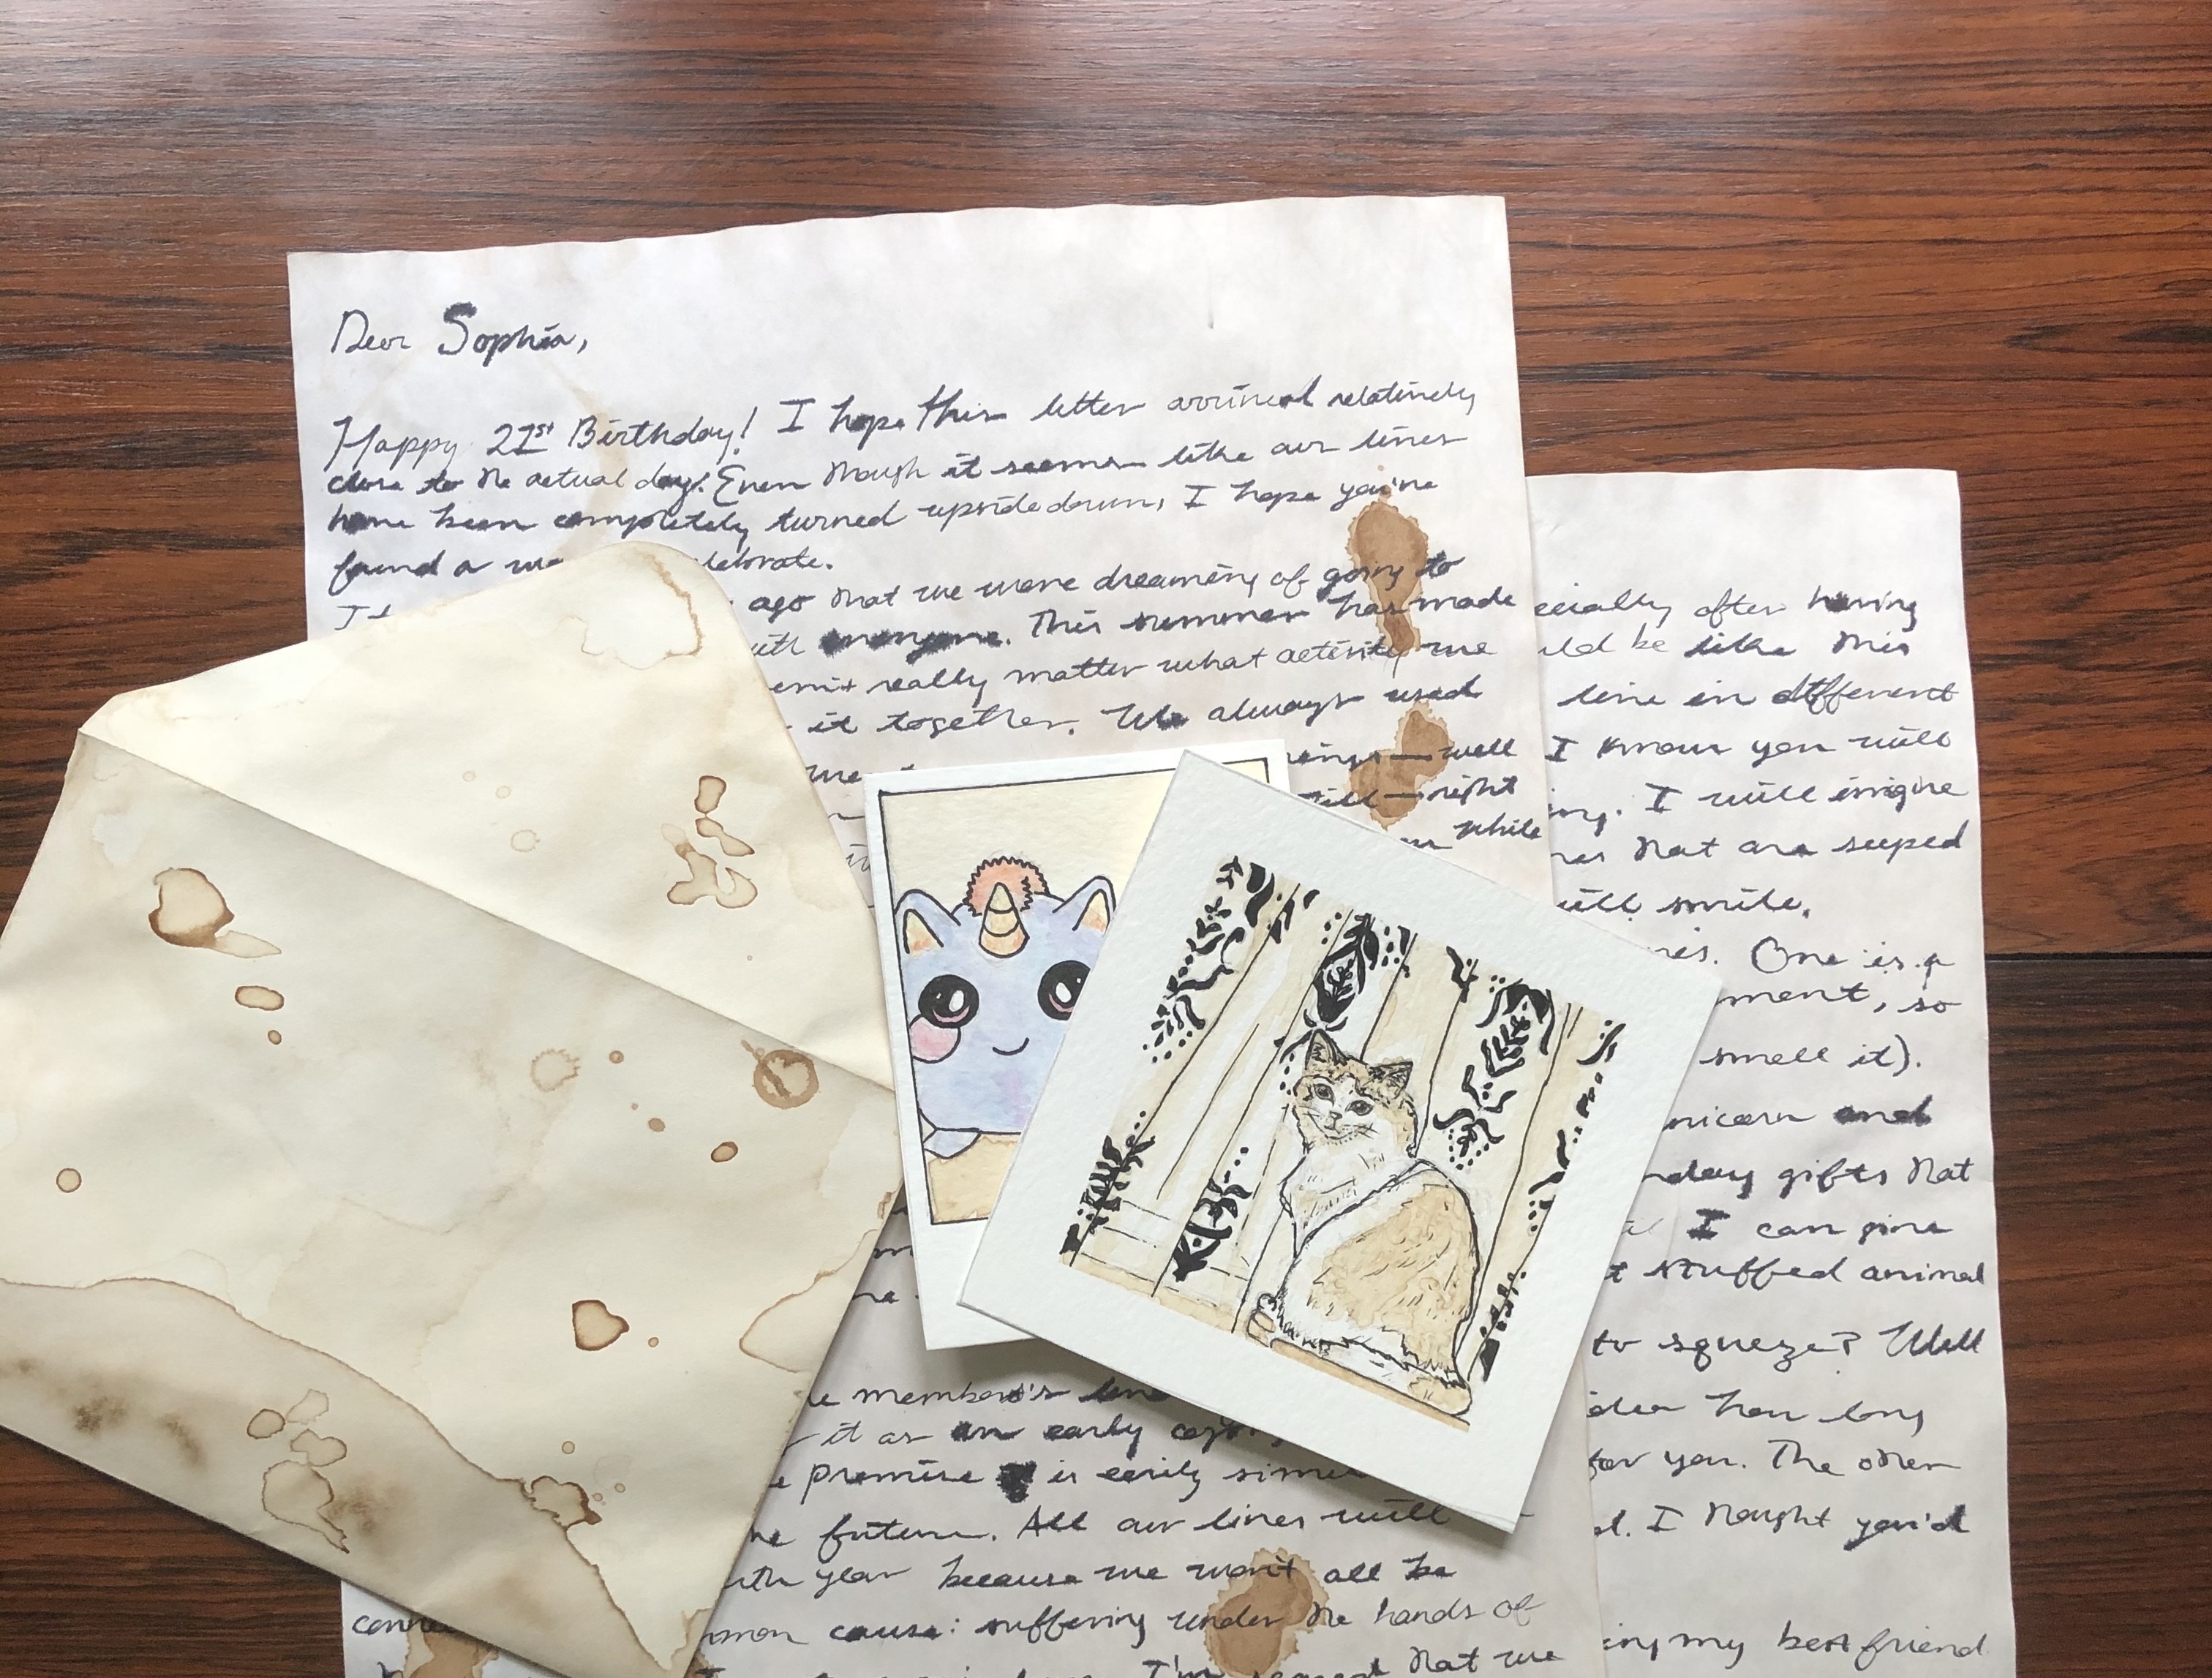 Handwritten letters, envelope, and images on wood table